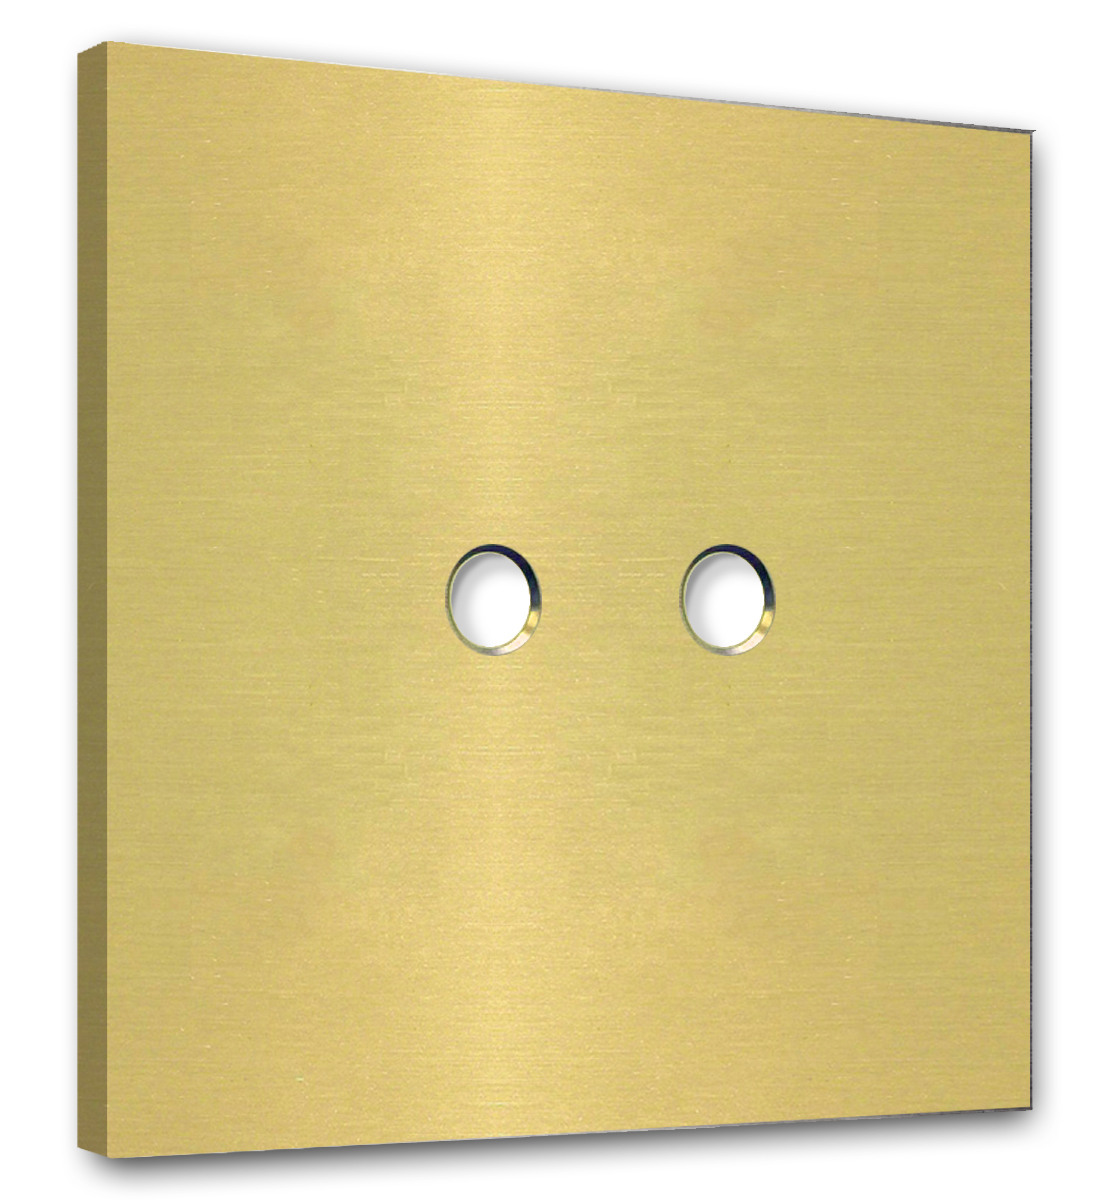 Retro toggle switch plate NINA 2-Gang.  Brass brushed metal. CJC Systems